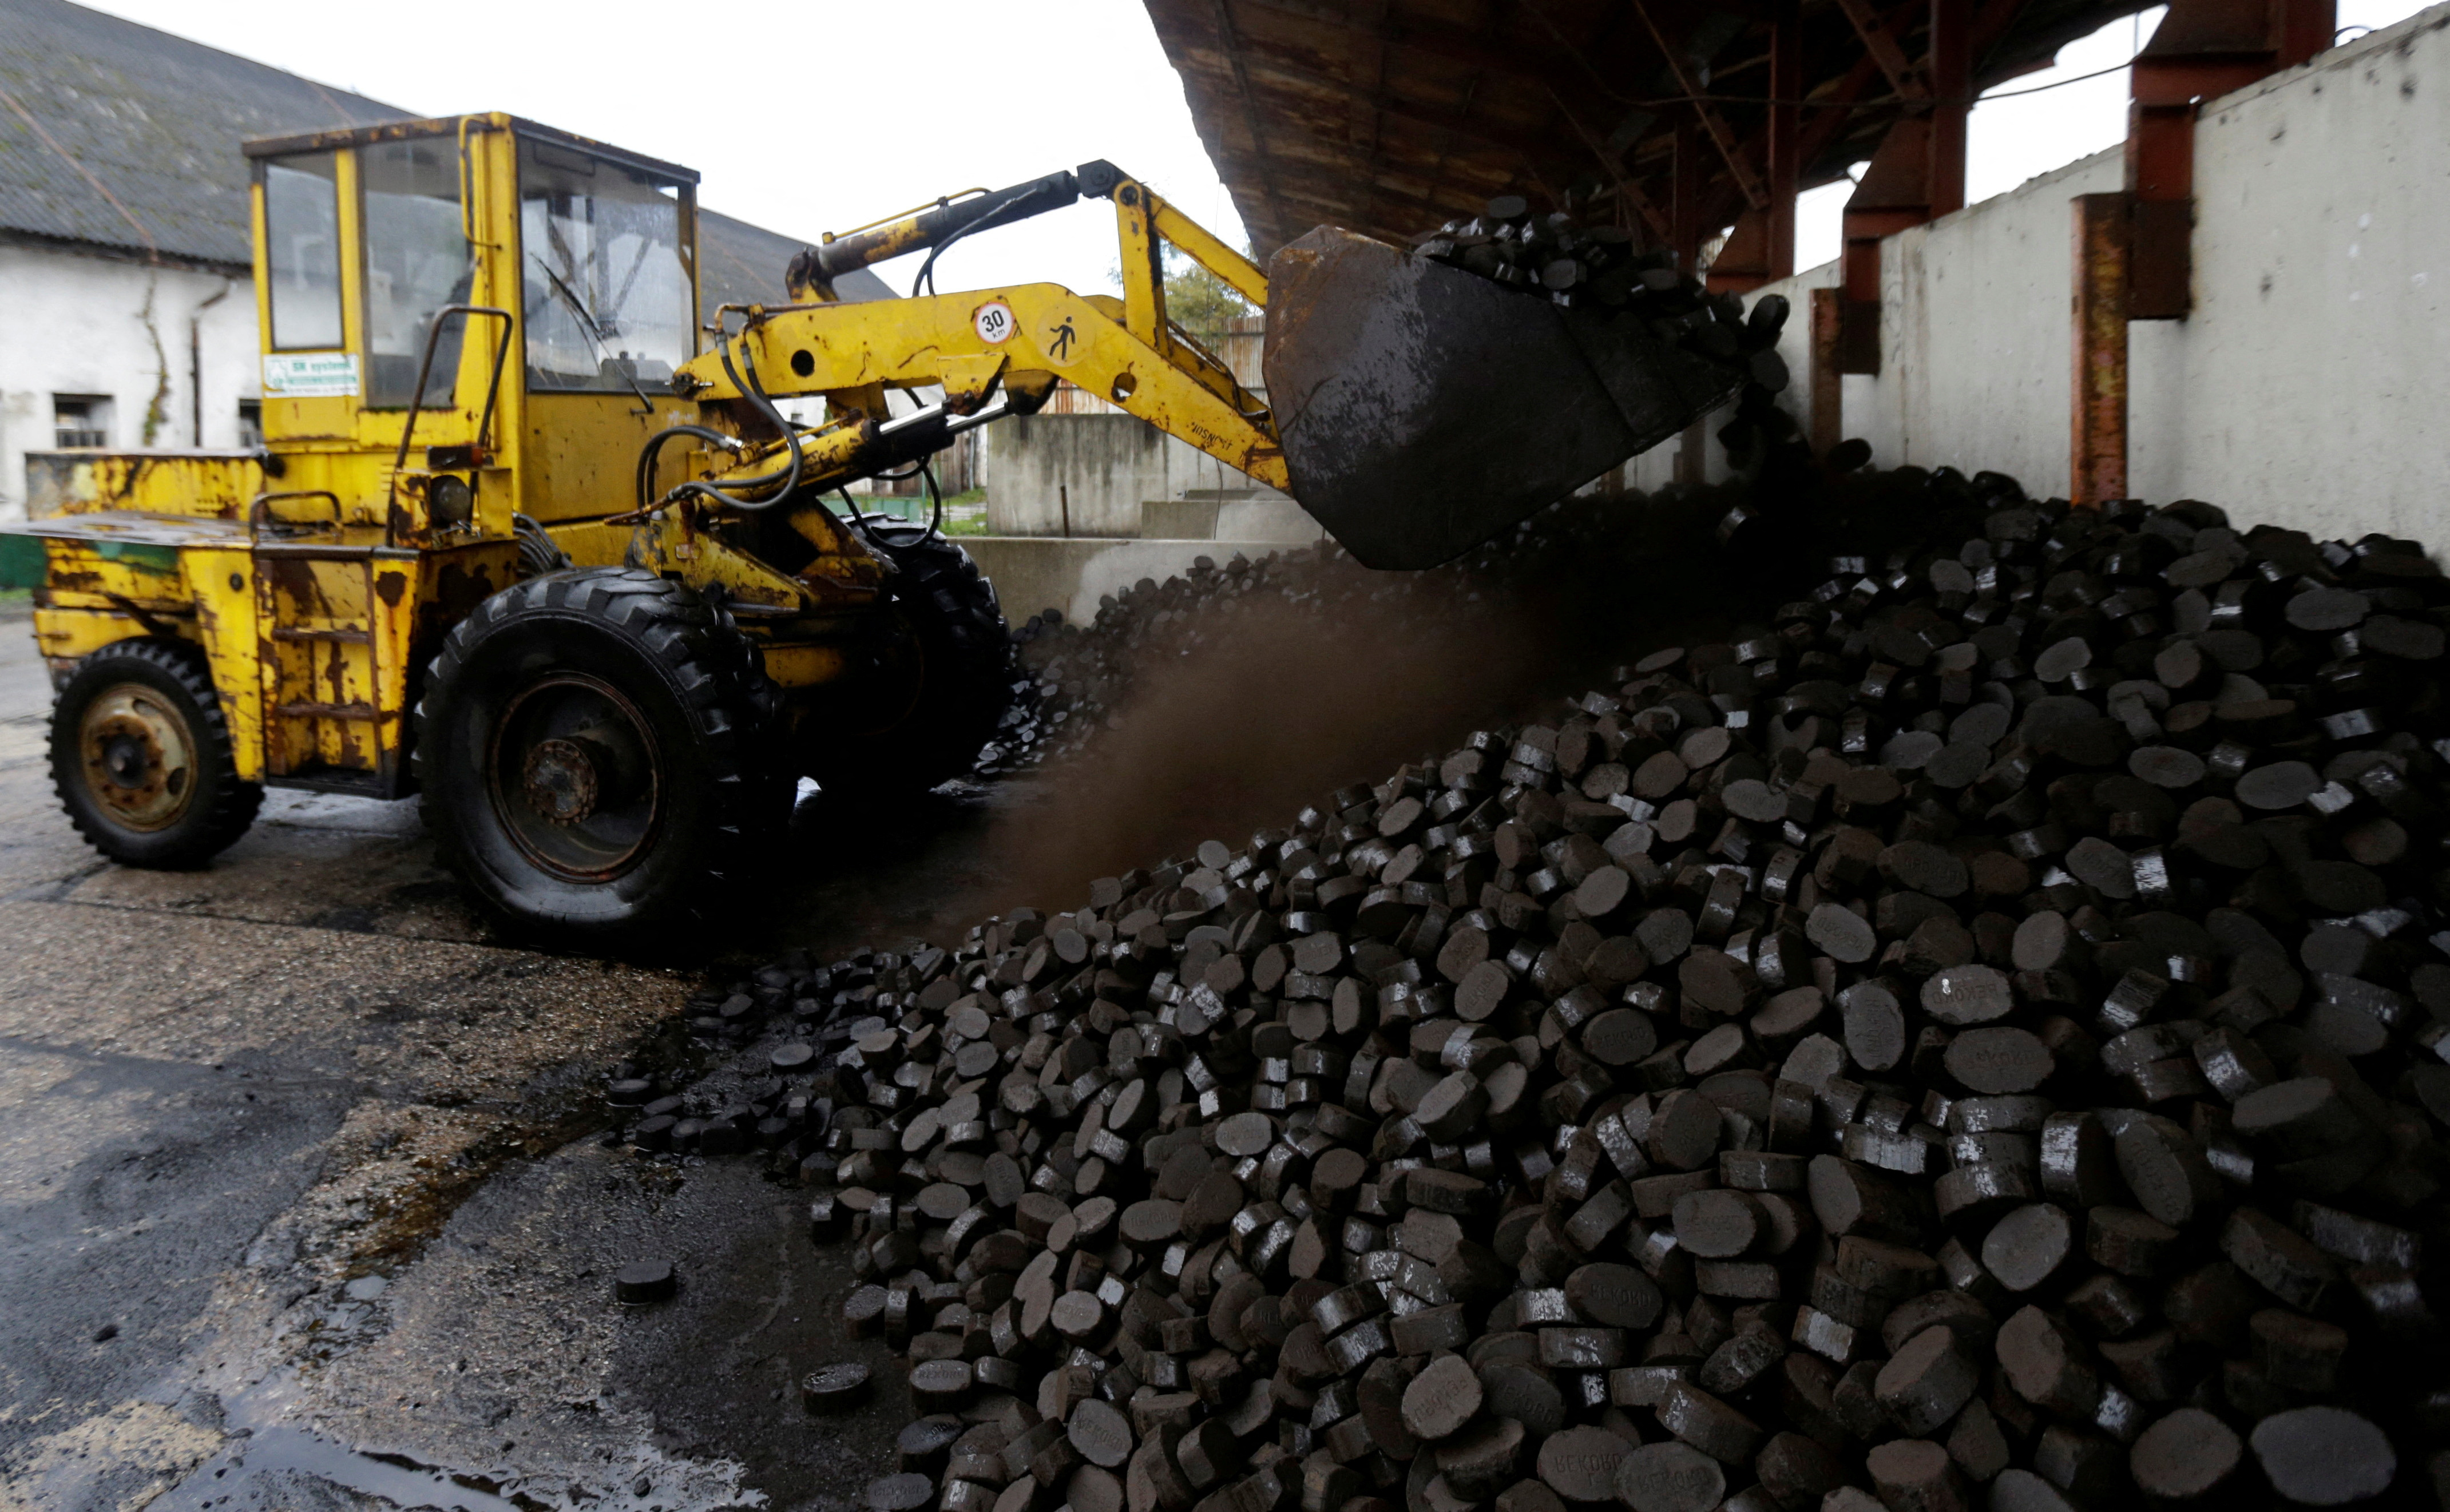 People buy coal as the winter heating season approaches amid soaring energy prices in Czech Republic